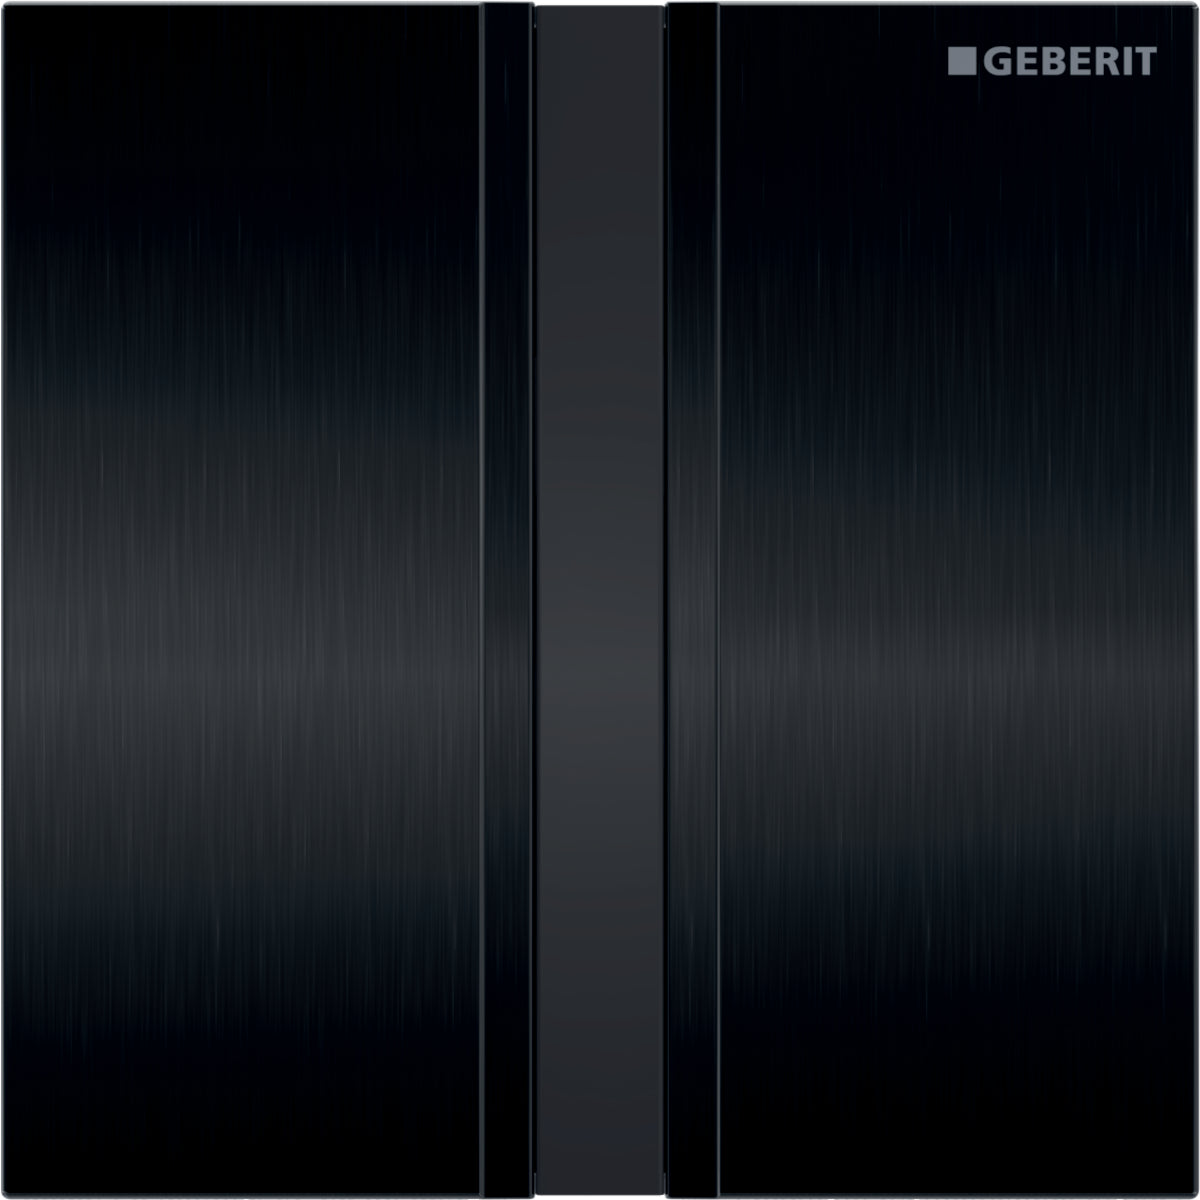 Geberit 116.026.QD.1- Geberit urinal flush control with electronic flush actuation, mains operation, cover plate type 50: black chrome / brushed, easy-to-clean coated - FaucetExpress.ca